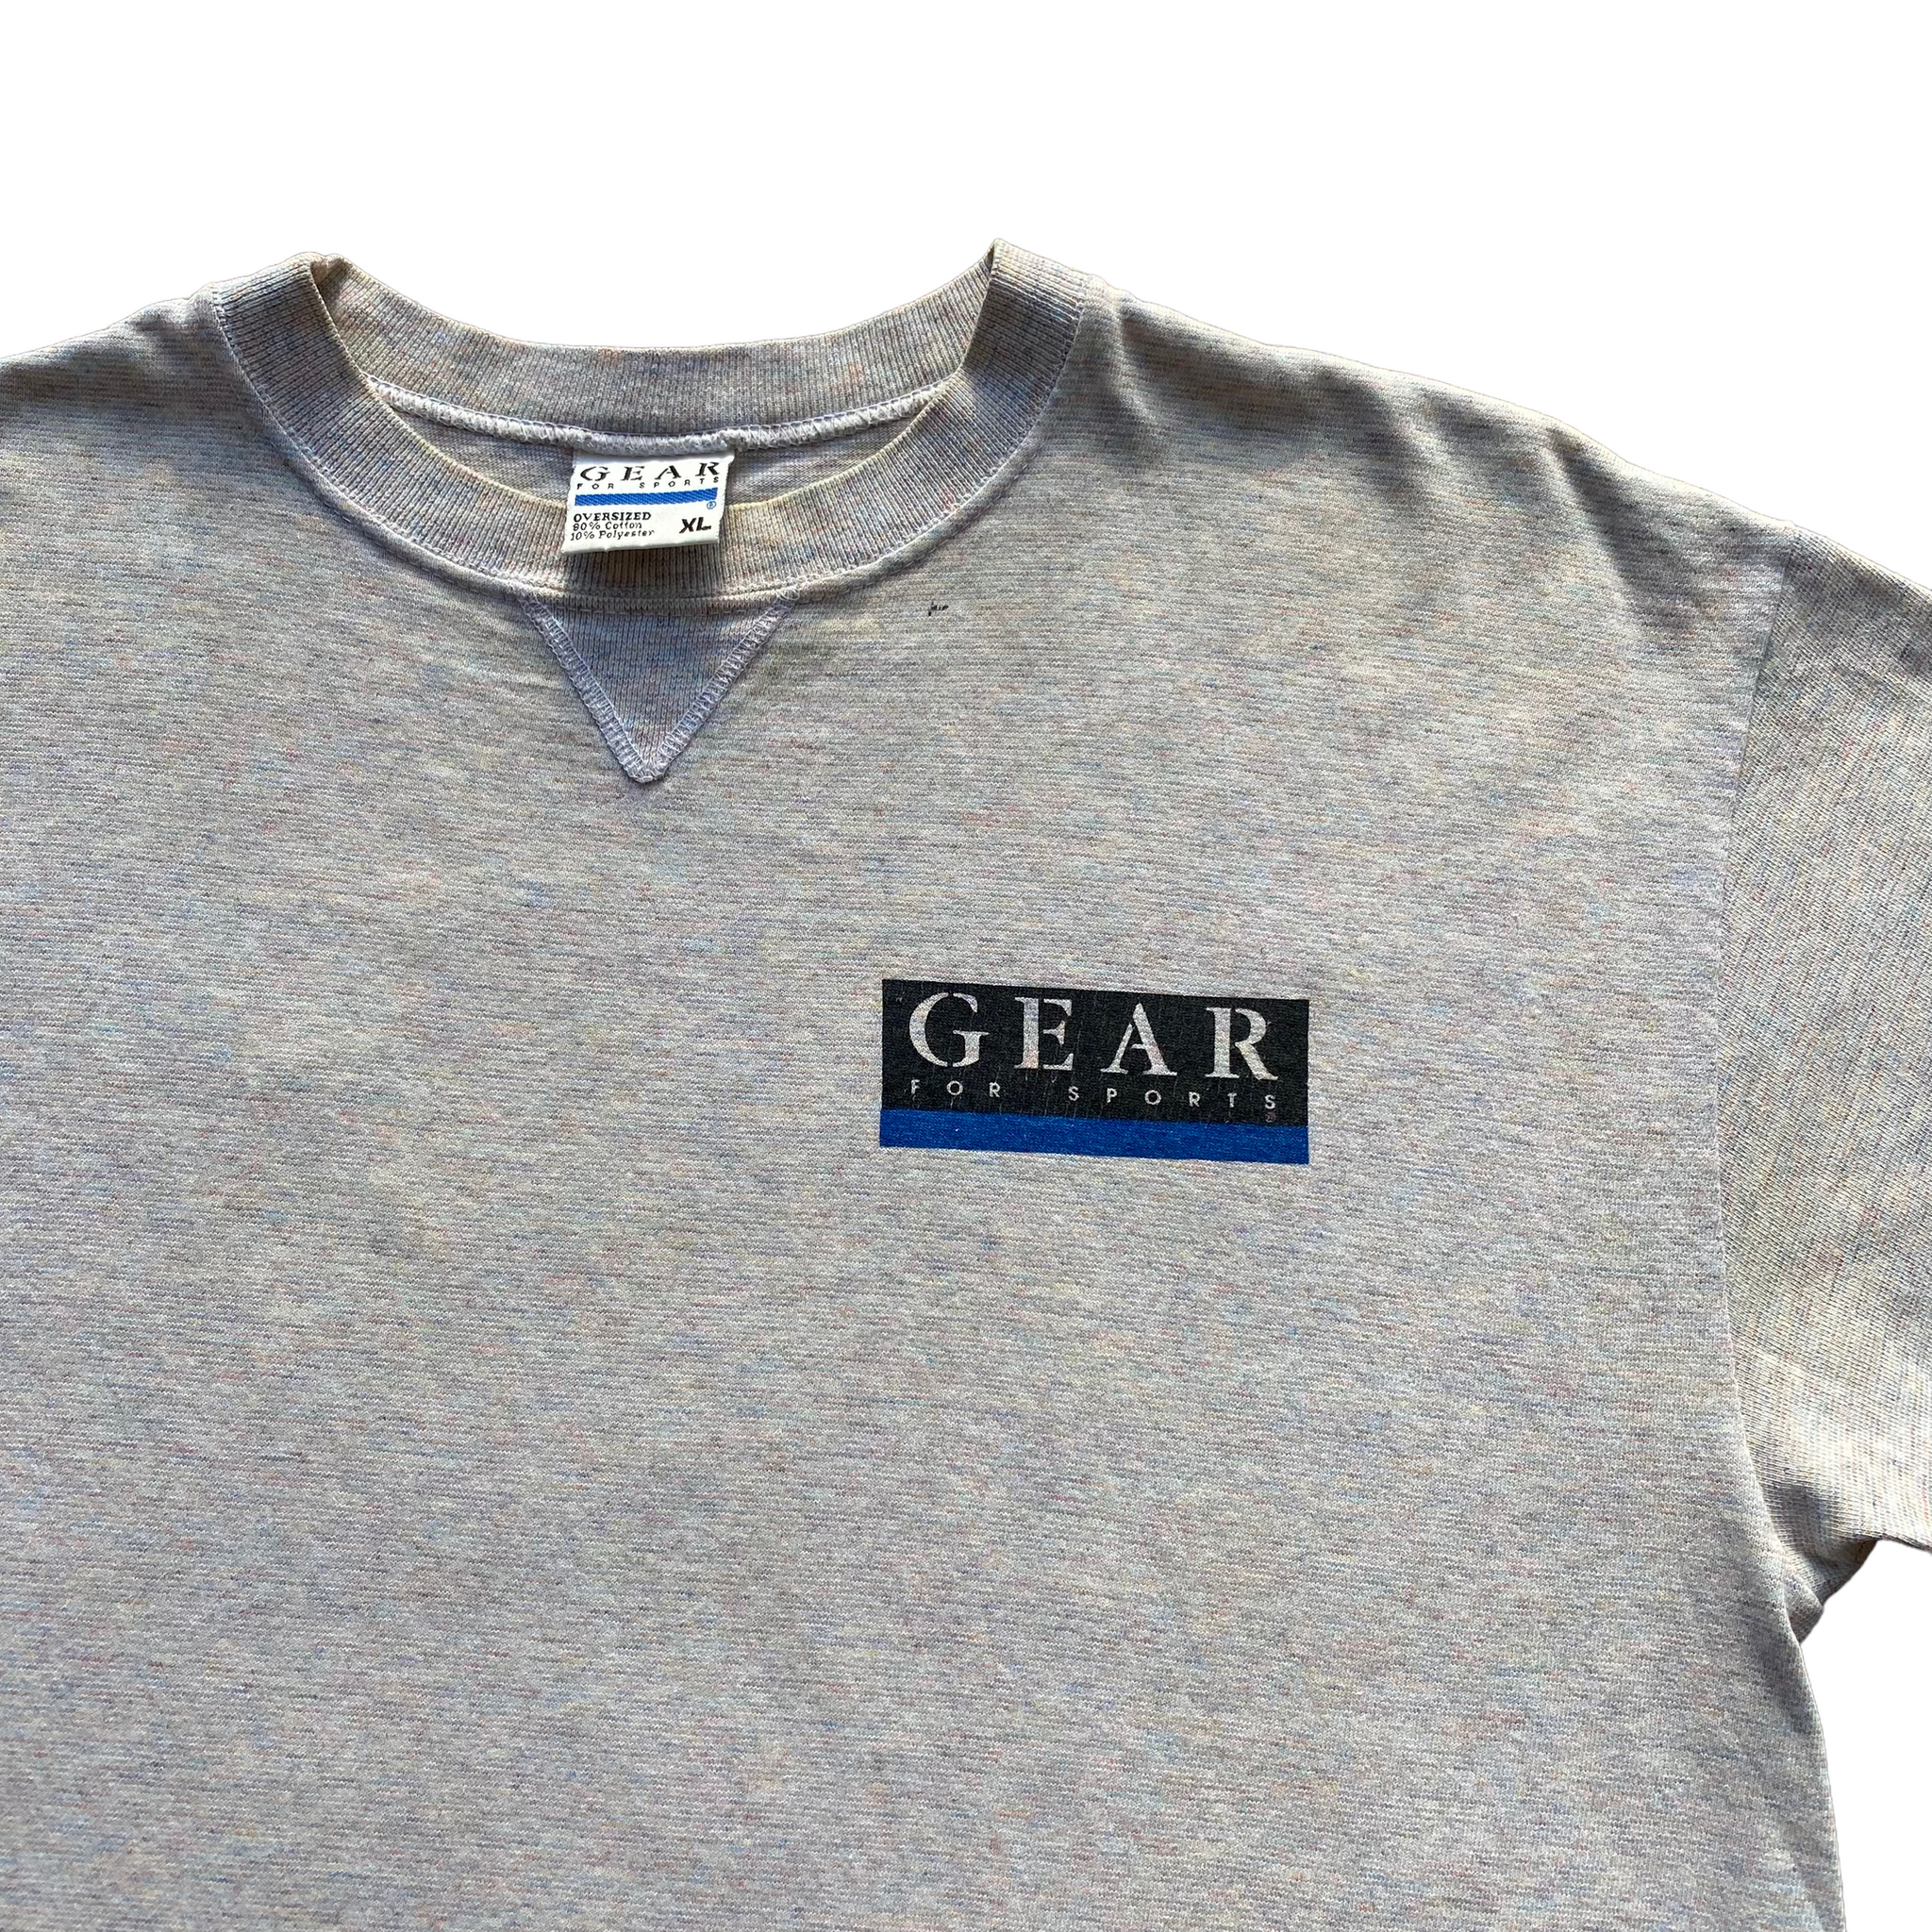 Gear for sports tee XL